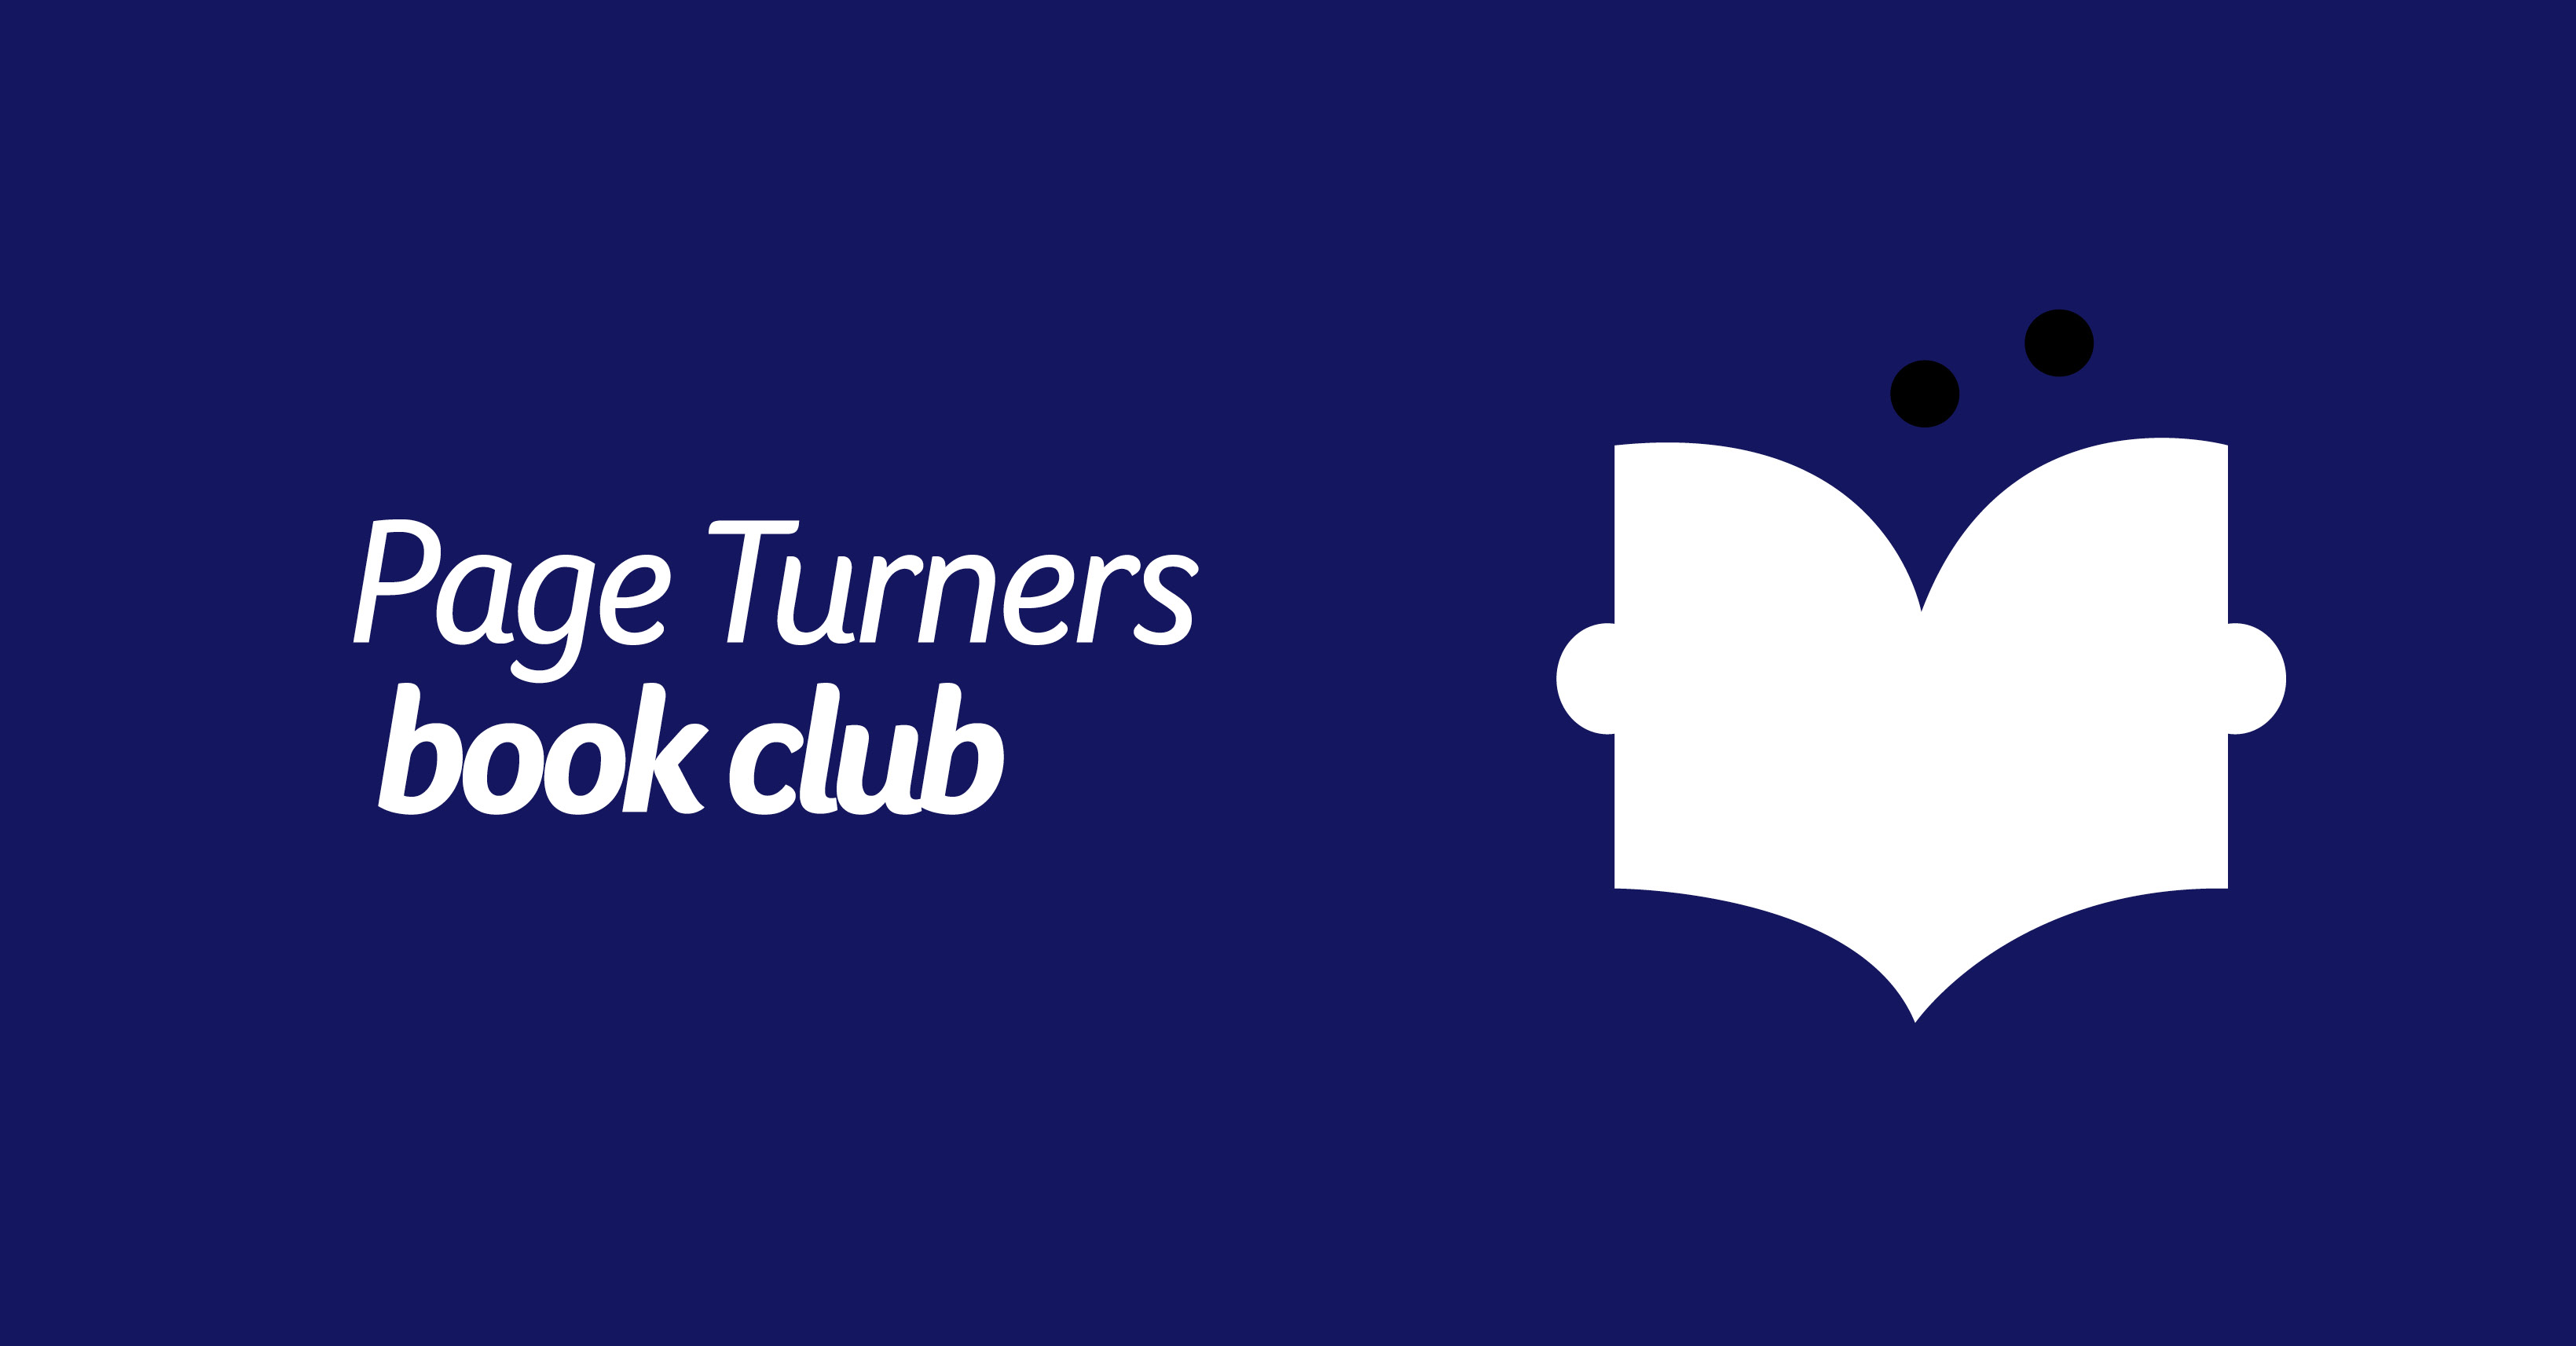 Manage your account Page Turners book club Age UK